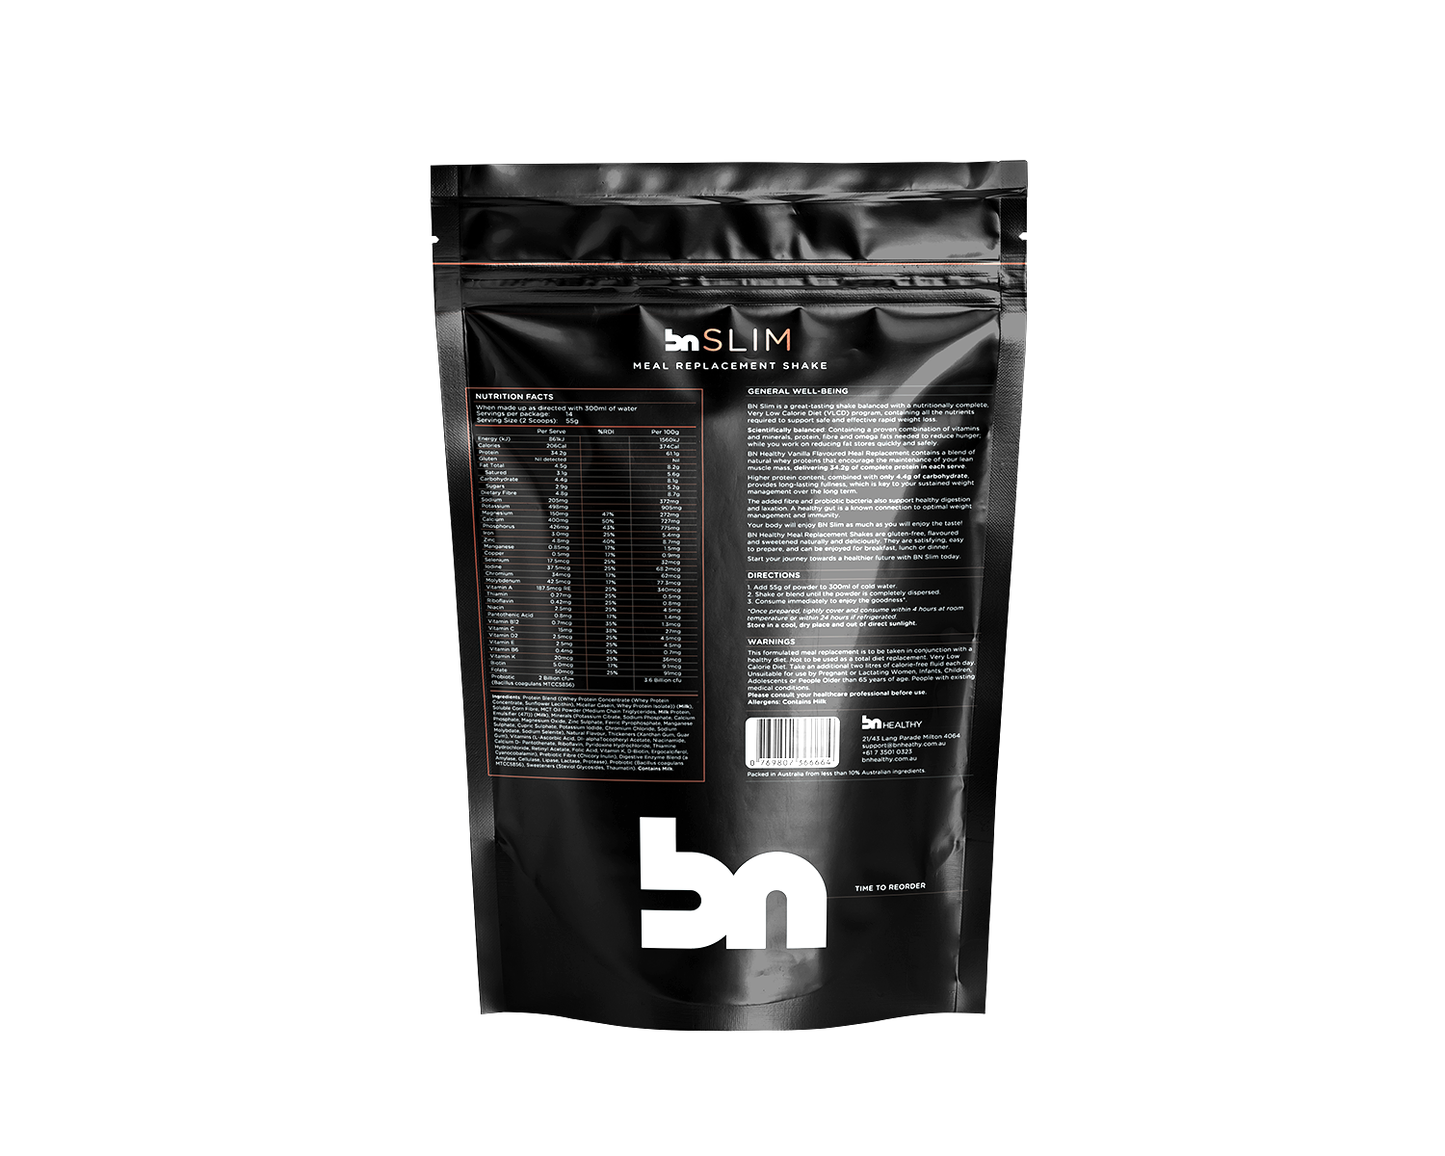 BN Slim - Meal Replacement Shake - BN Healthy